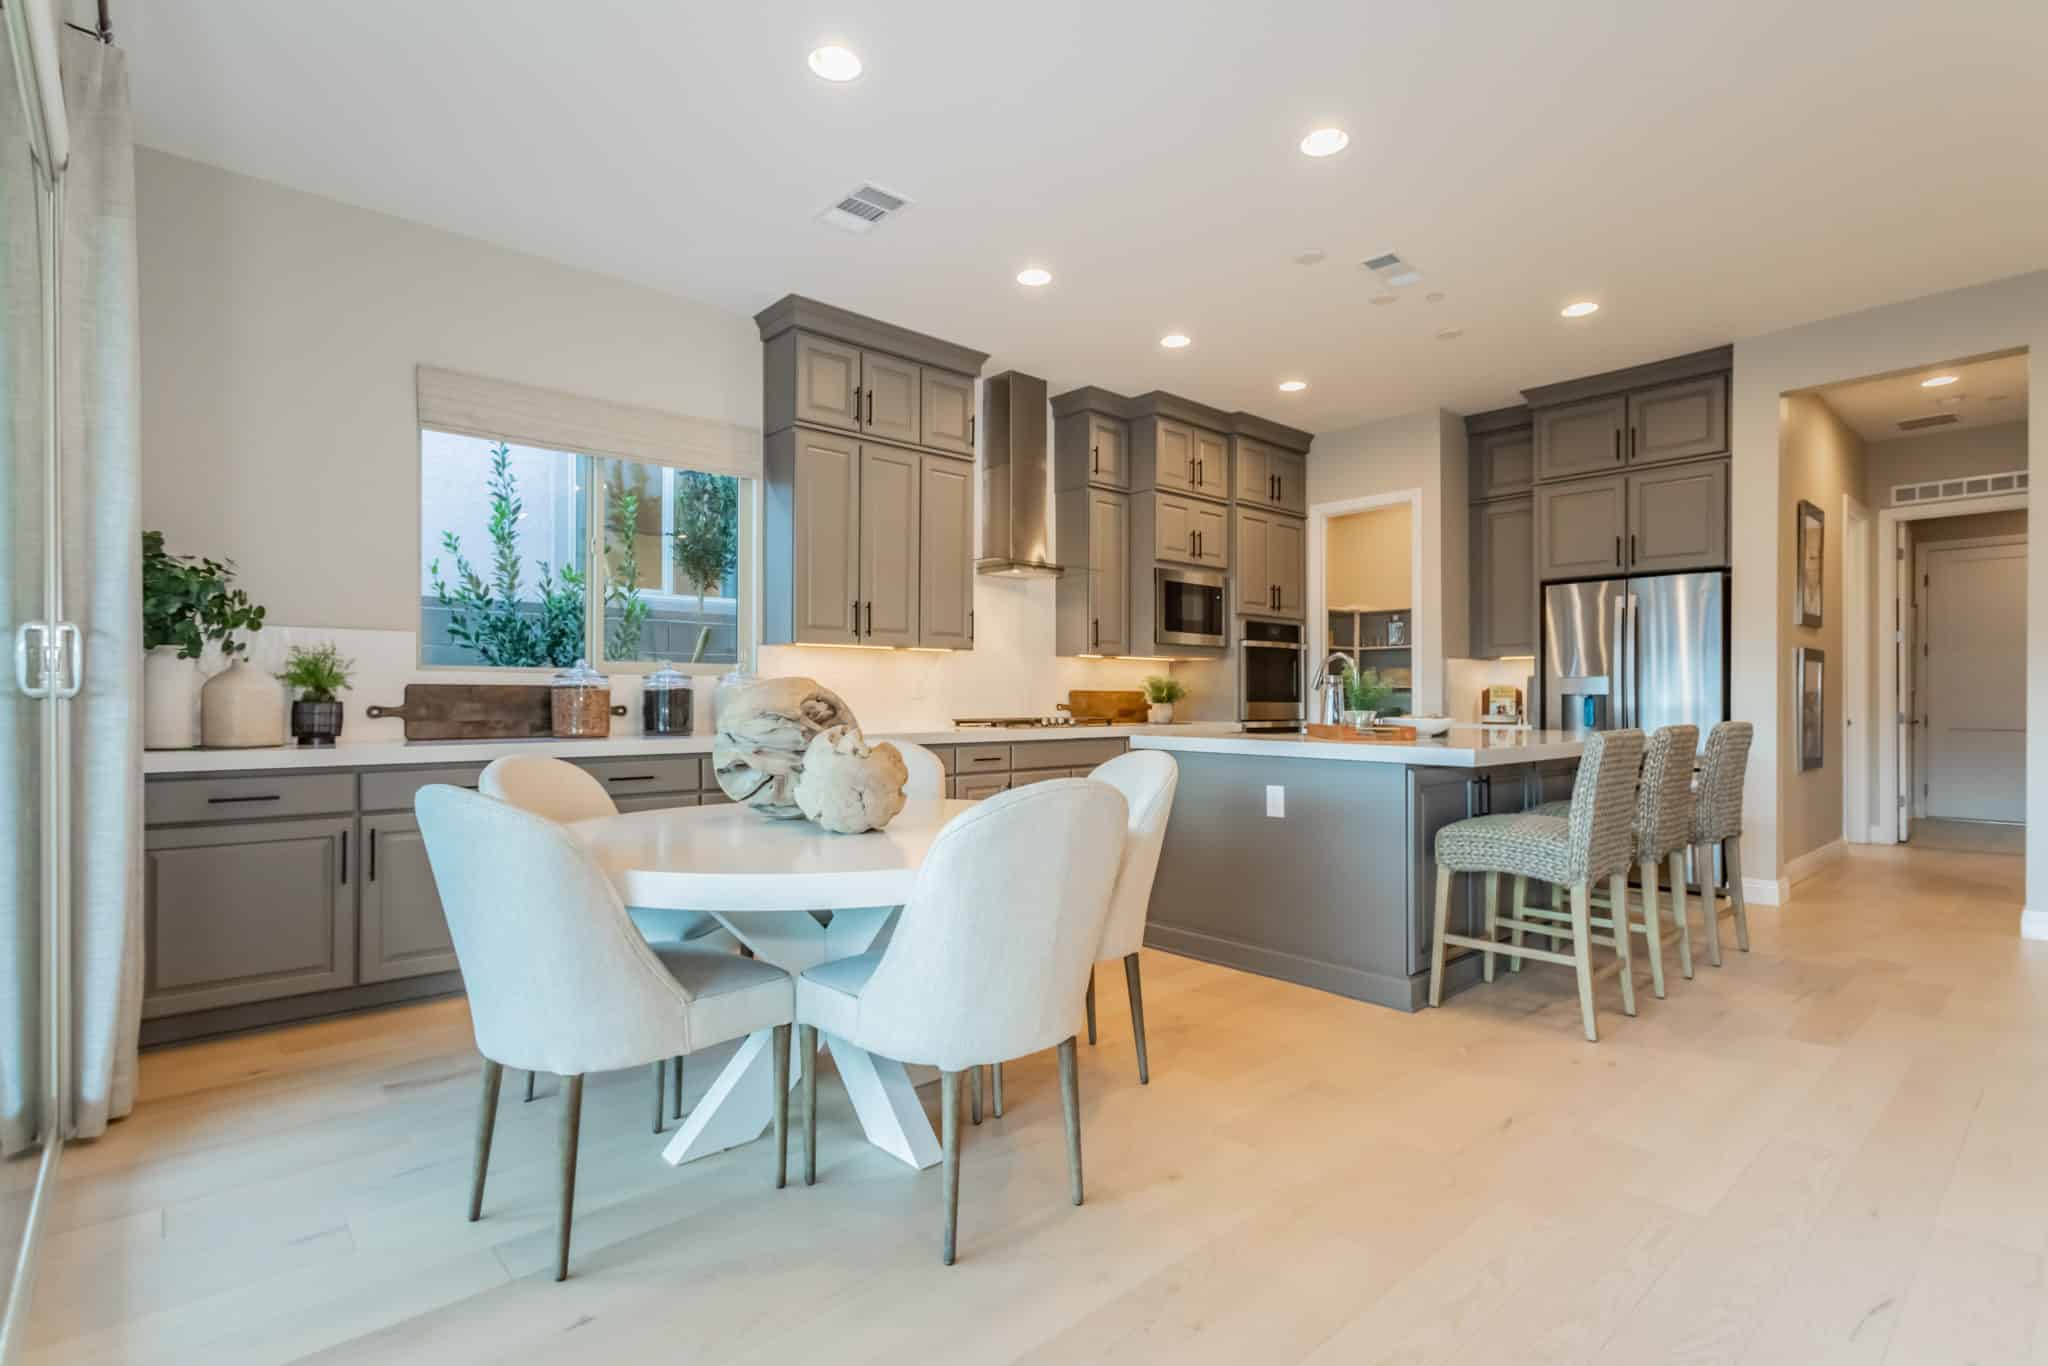 Kitchen of Merlin Plan 2 at Falcon Crest by Woodside